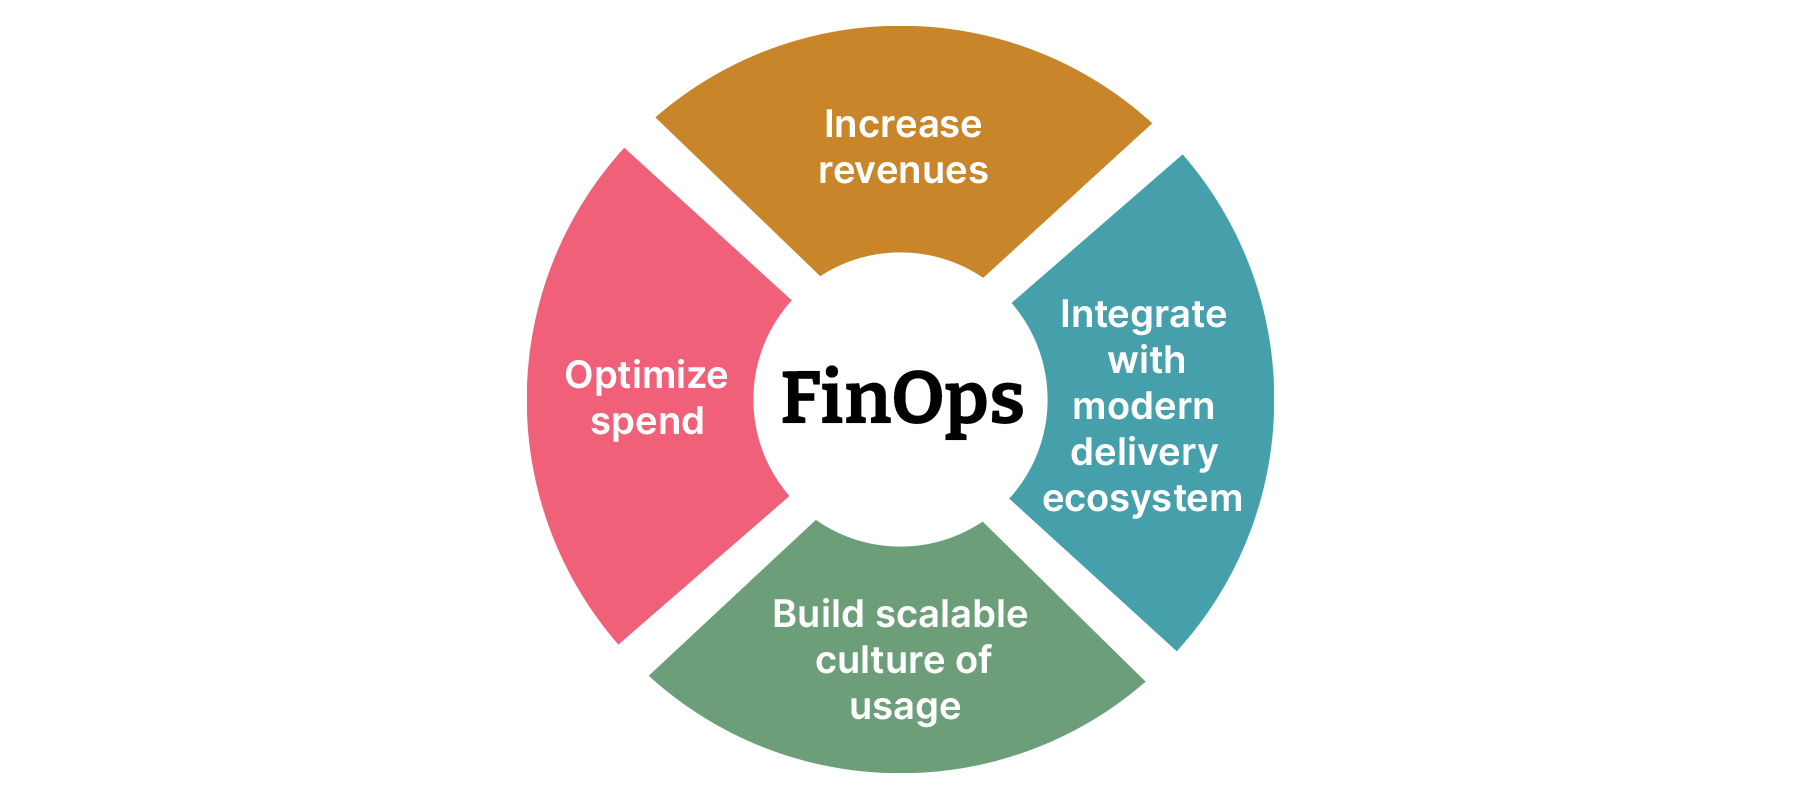 Flywheel with FinOps at the center and Increase revenues, integrate with modern delivery ecosystem, build scalable culture of usage and optimize spend around